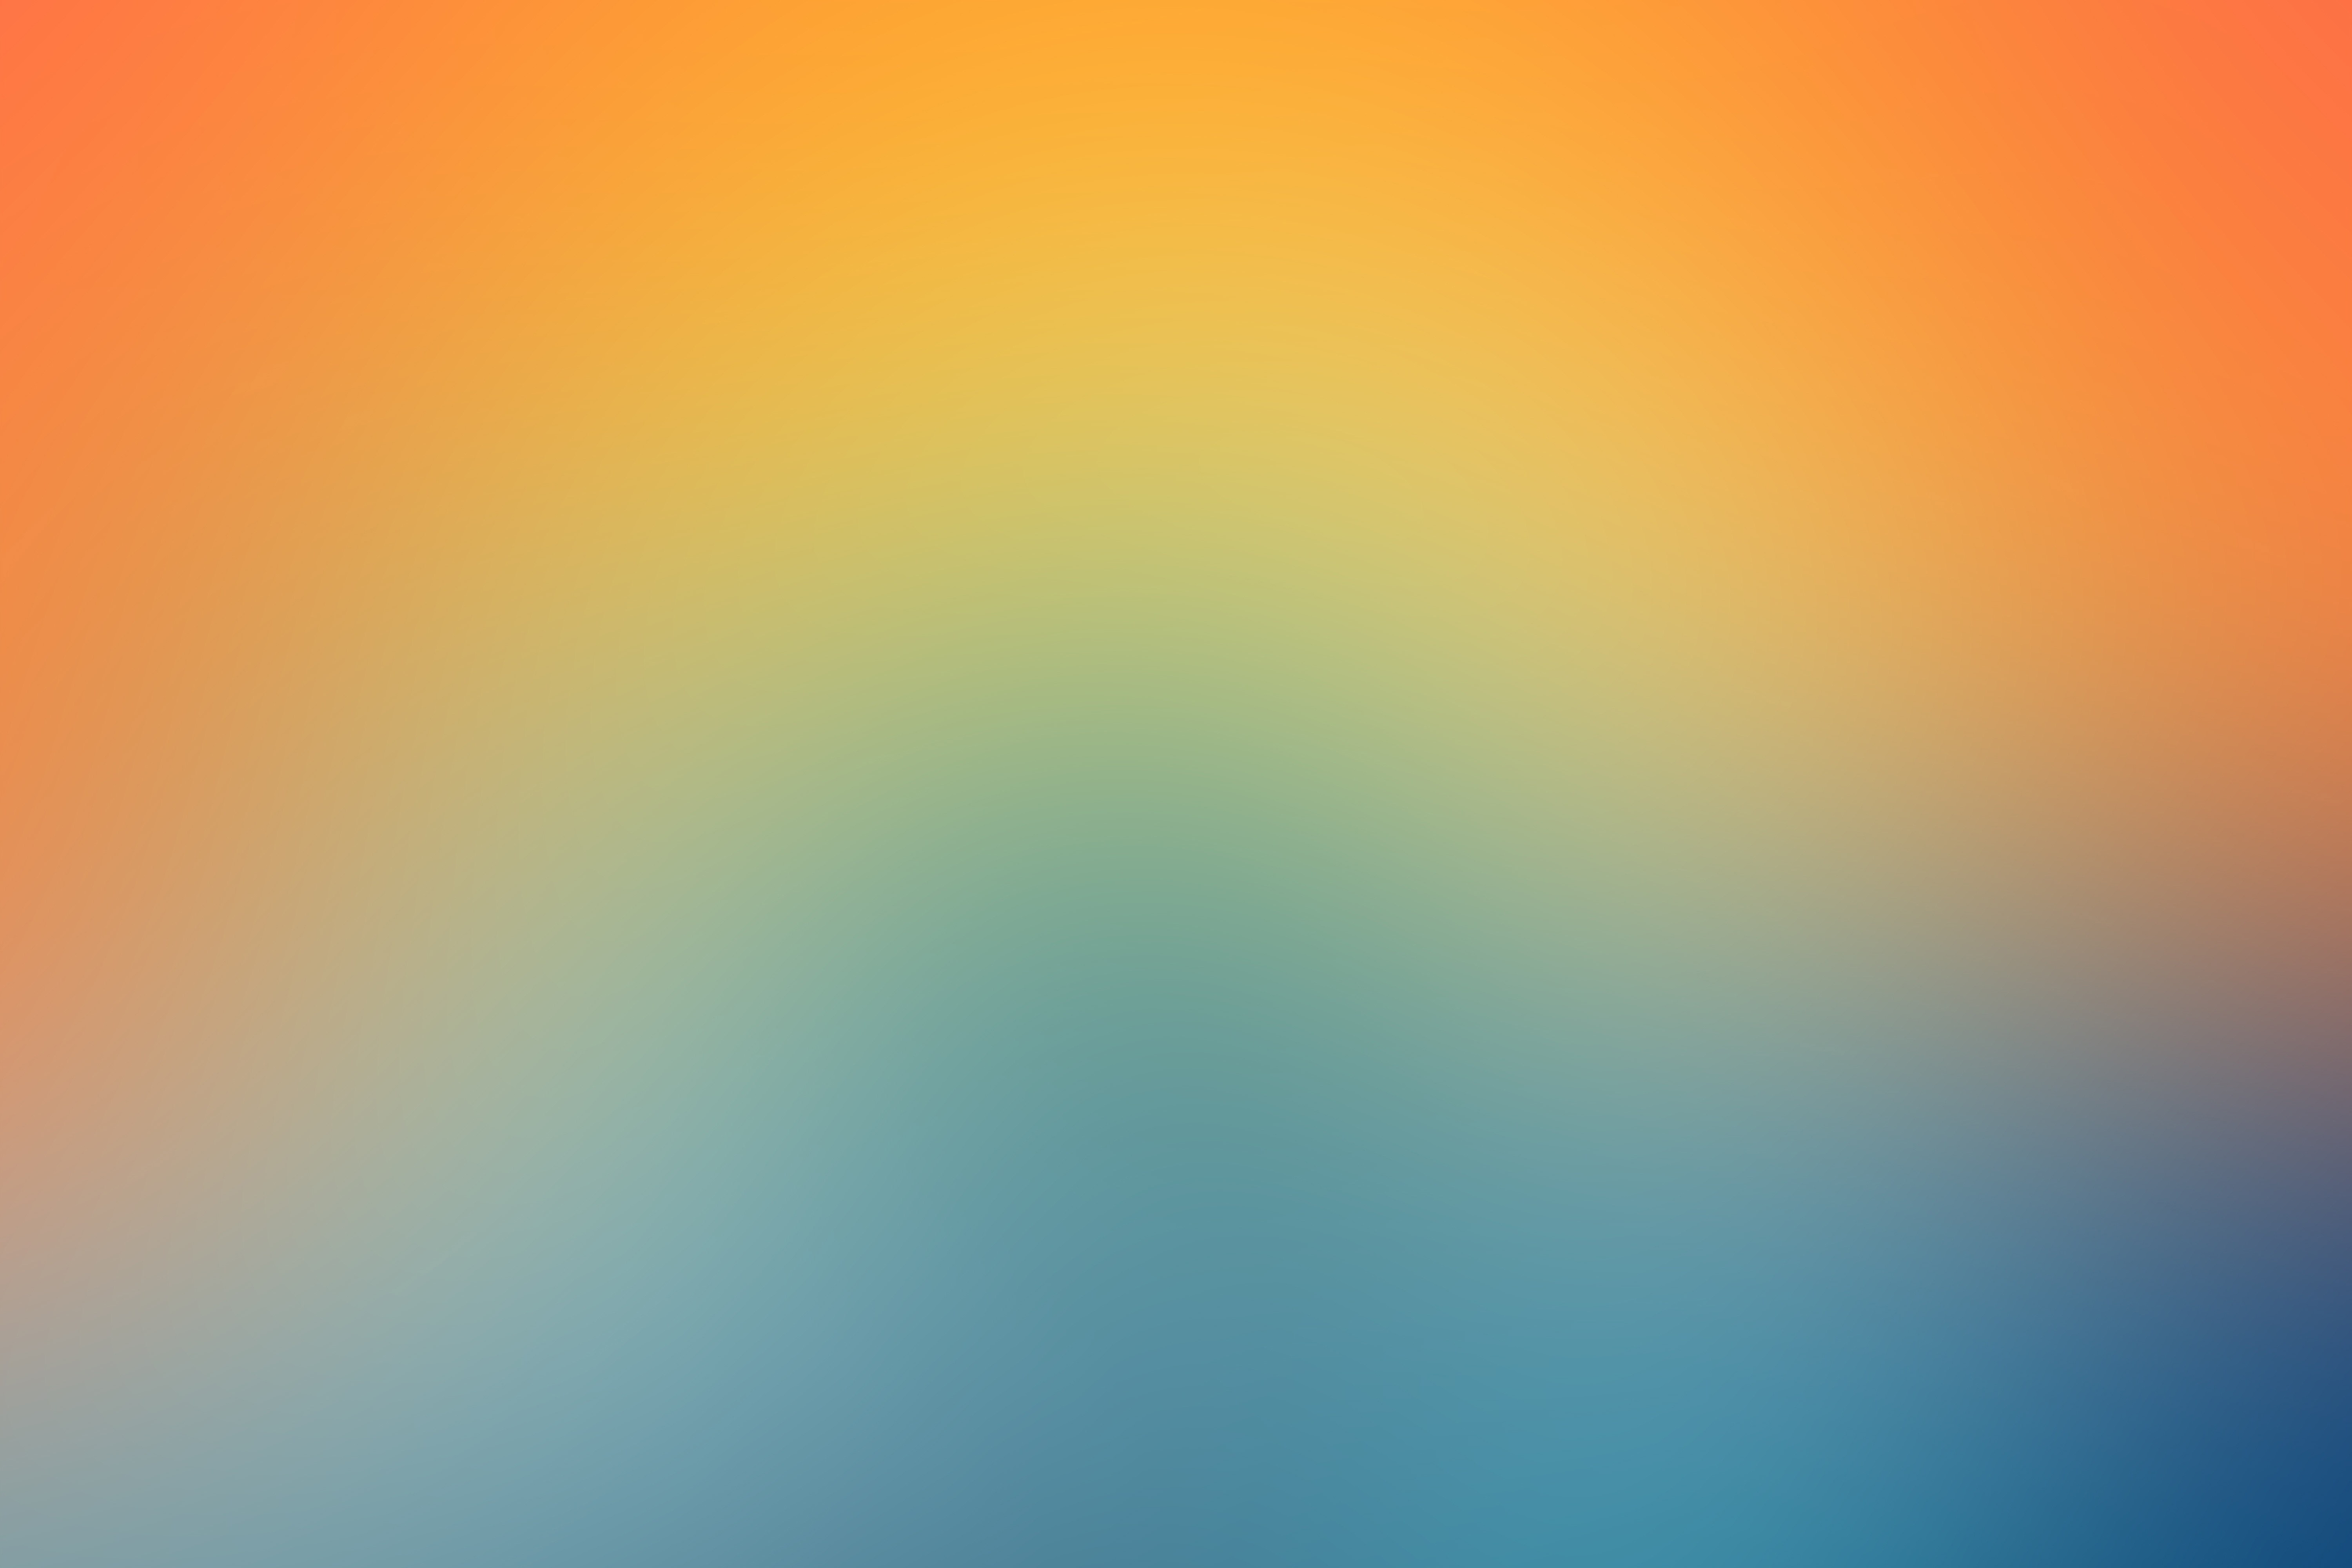 gradient, yellow, blue, texture, textures, blur, smooth, mixing, soft